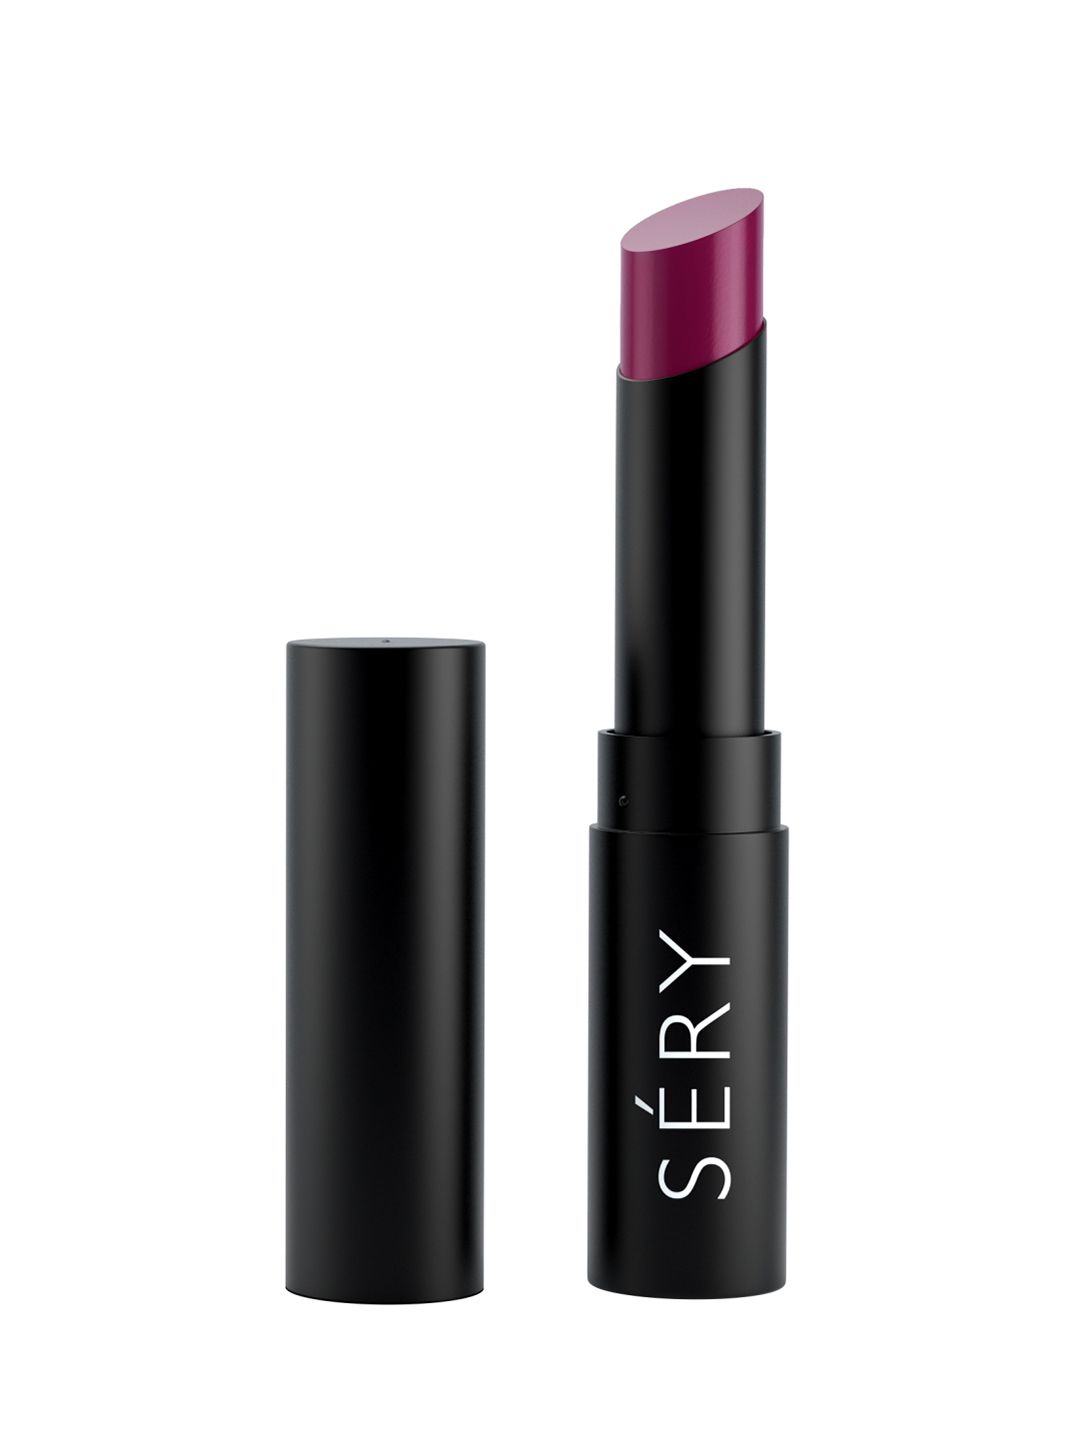 SERY Say Cheeez Creamy Matte Lip Color - My Magenta CL08 Price in India